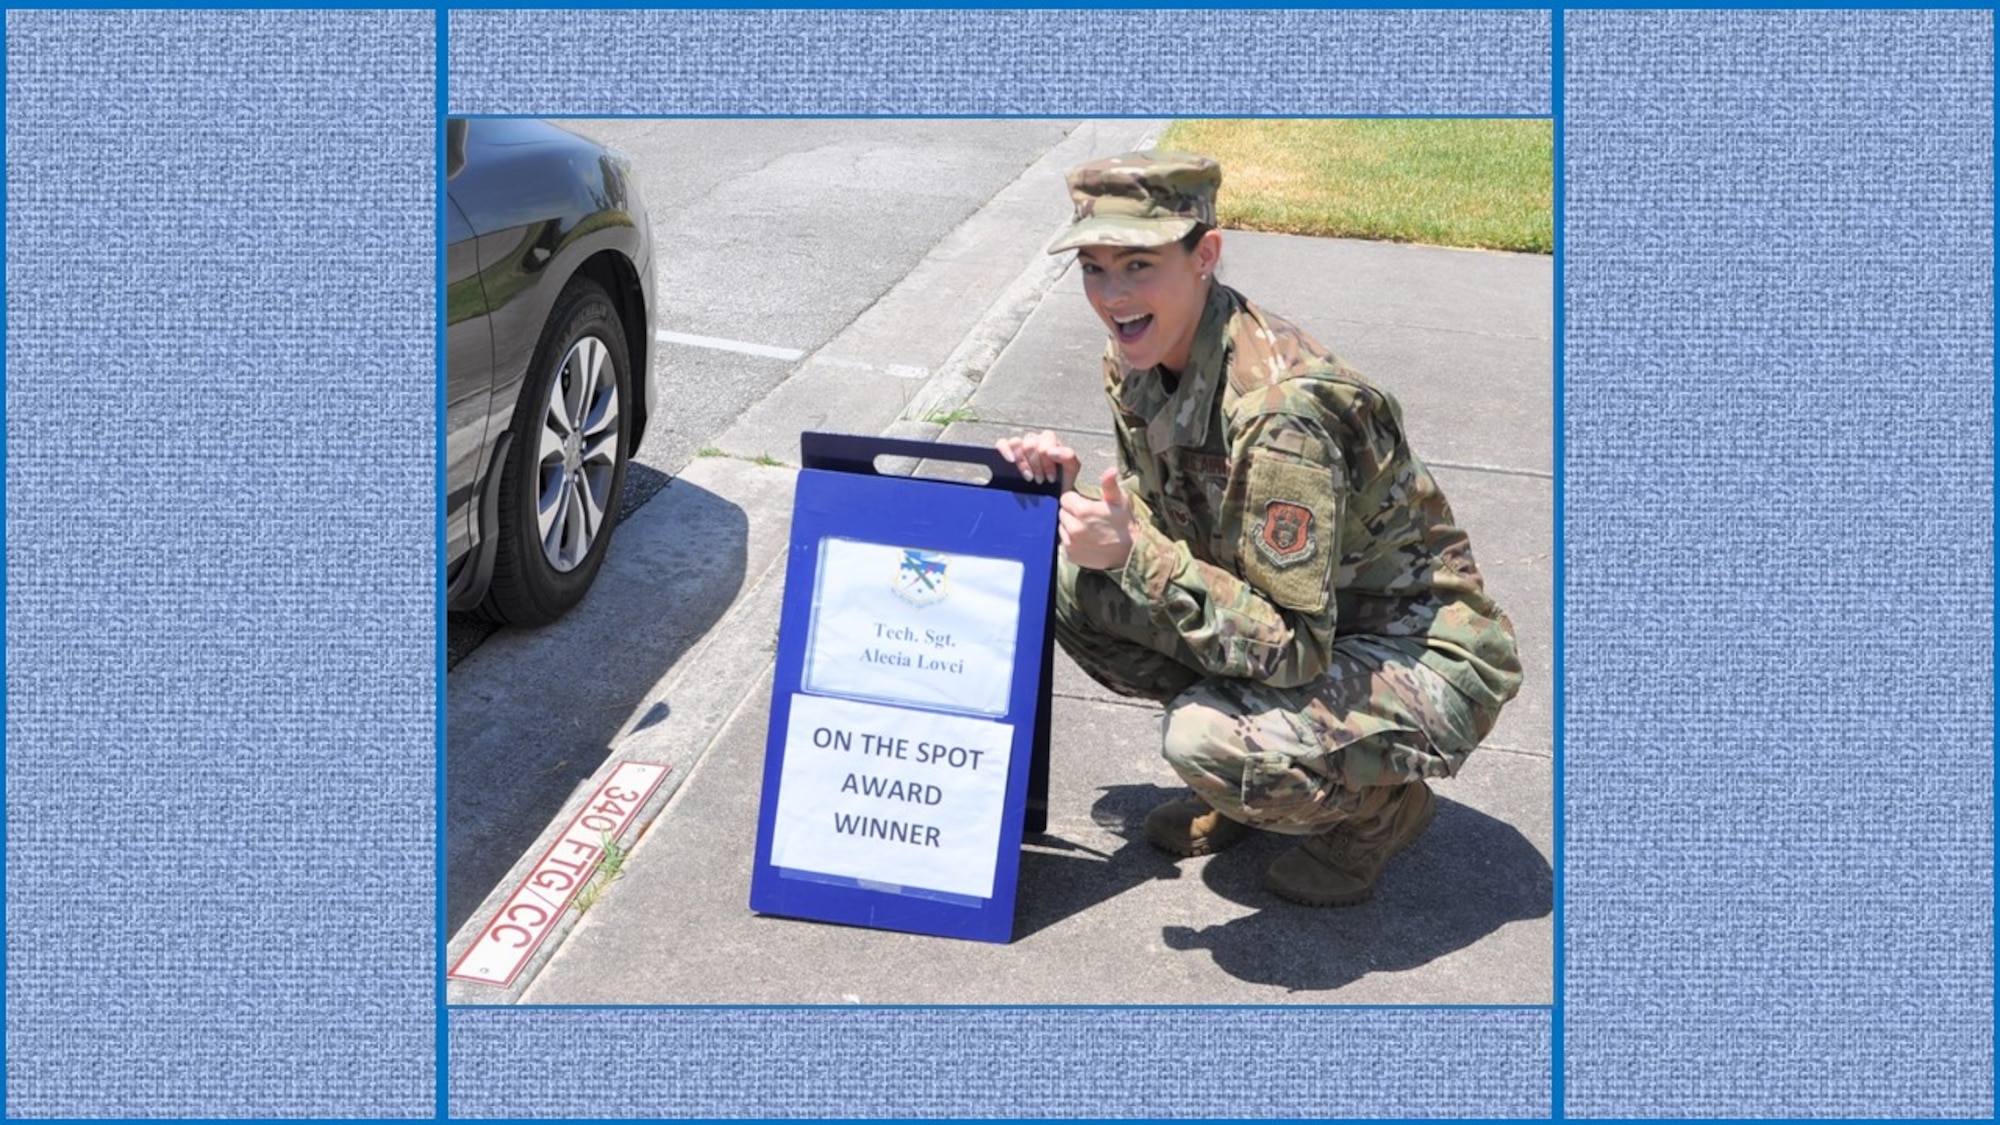 Tech. Sgt. Alecia Lovci, 340th Flying Training Group Undergraduate Flying Training program student administration specialist, claims her turn in the boss' parking slot following her selection as the July On-the-Spot Award winner. (U.S. Air Force photo by Janis El Shabazz)